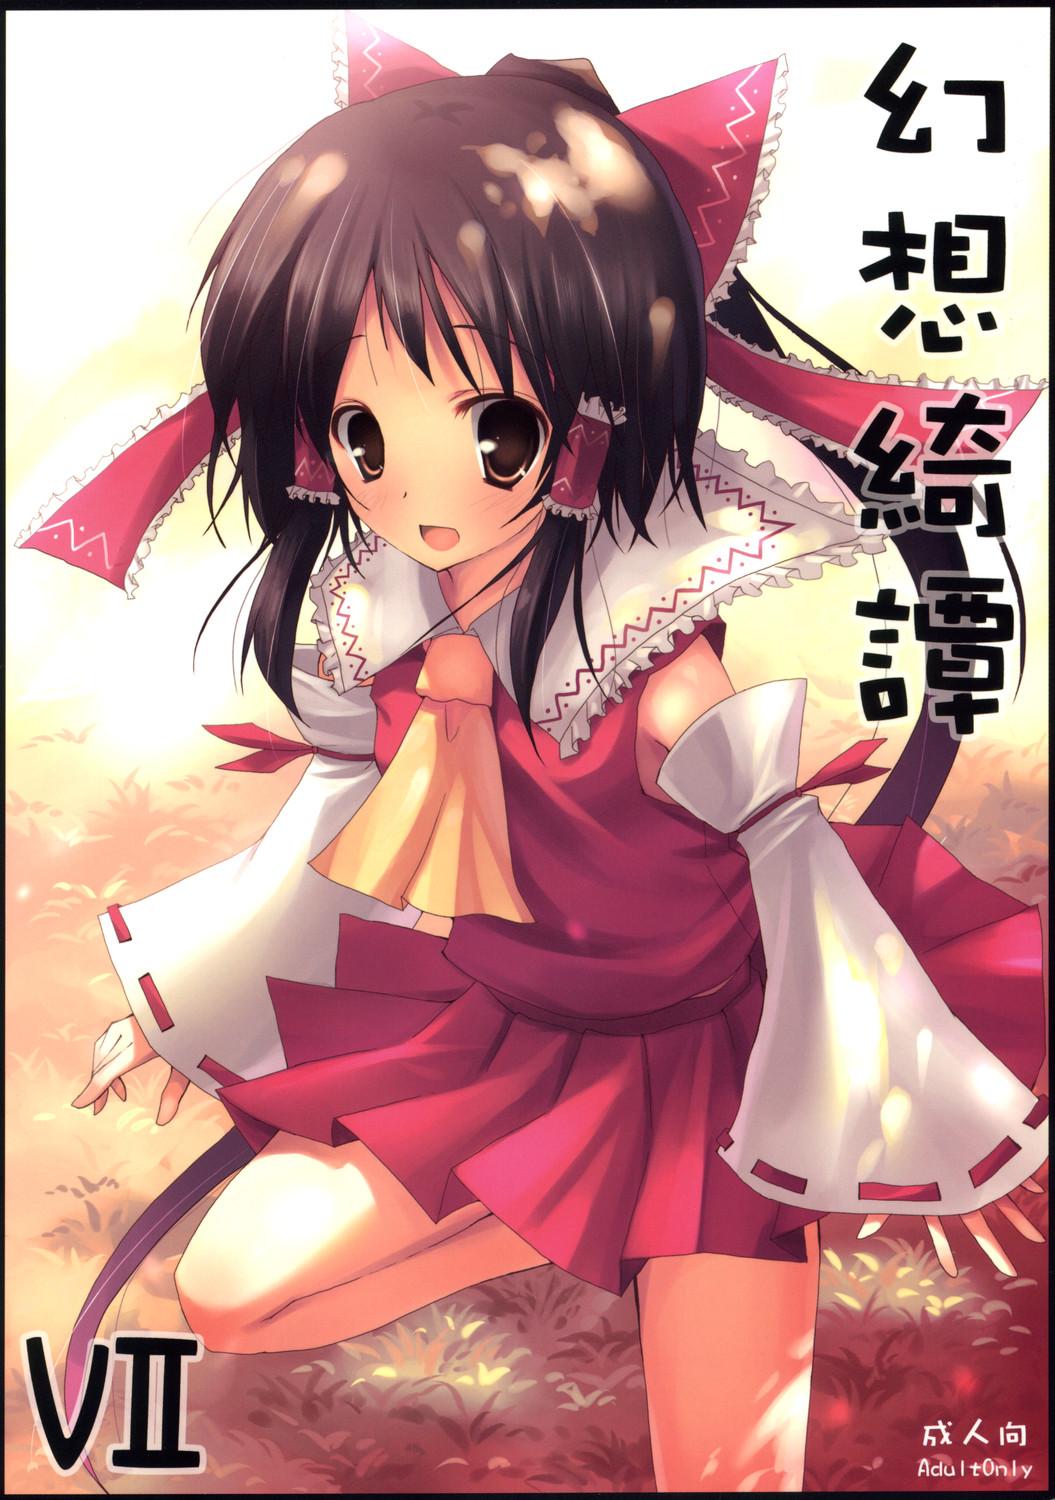 Missionary Gensou Kitan VII - Touhou project Teenpussy - Picture 1